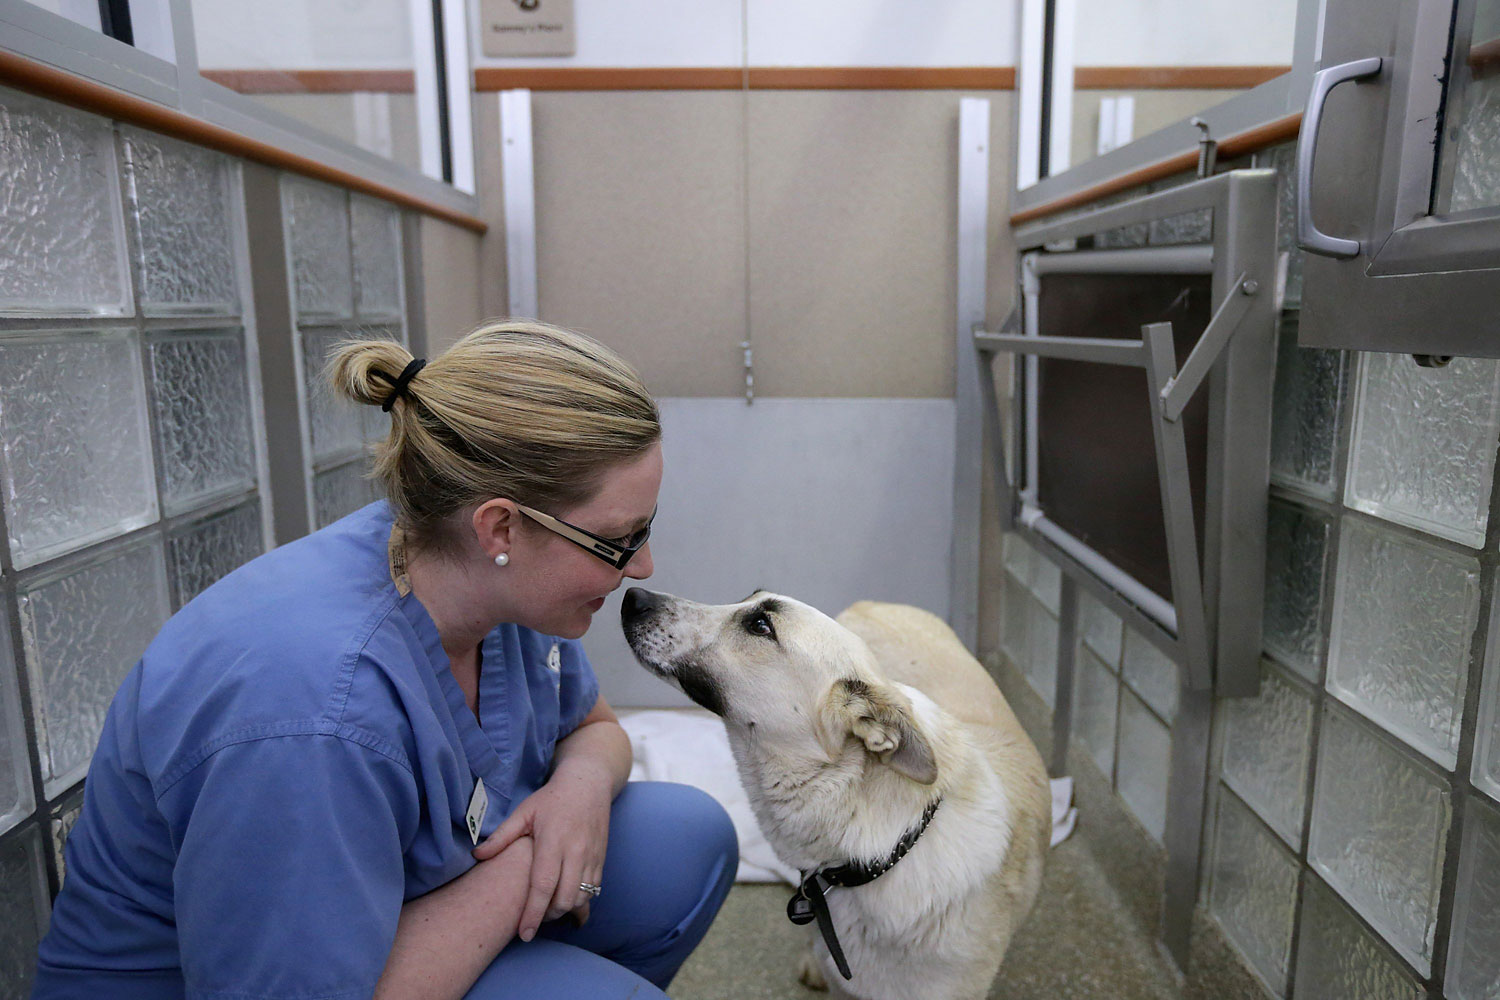 Washington Animal Rescue League Intake Director Maureen Sosa visits with a stray dog from Sochi, Russia, inside its 'doggie den' at the league's shelter March 27, 2014 in Washington, DC. (Chip Somodevilla—Getty Images)